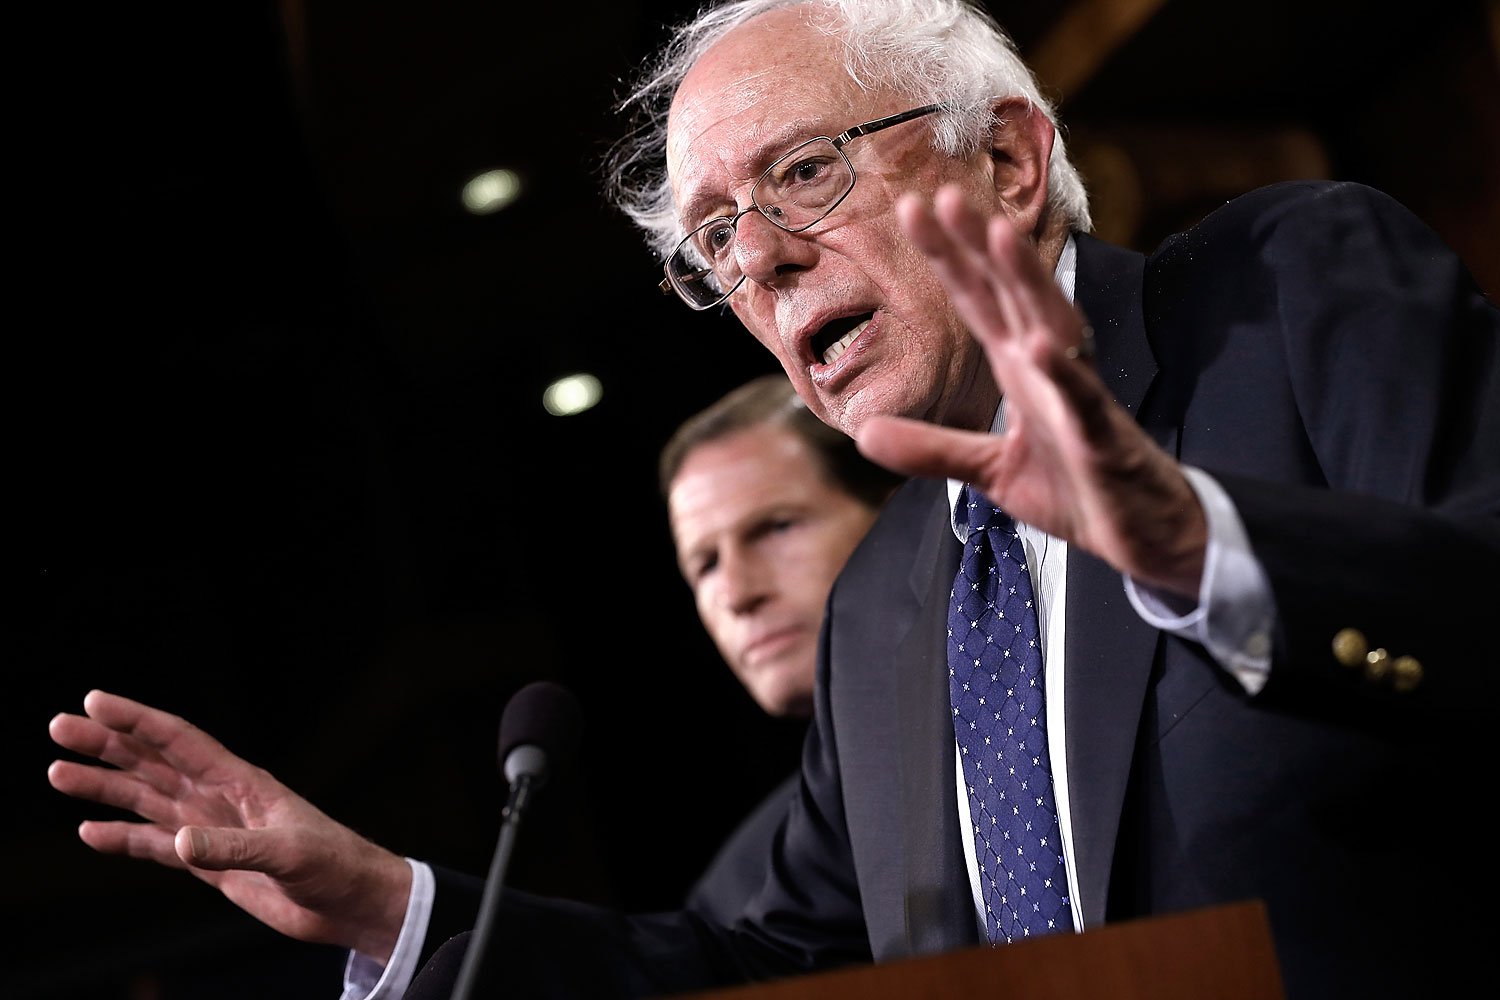 Sen. Bernie Sanders, Chairman of the Senate Veterans Affairs Committee, during a press conference at the U.S. Capitol July 24, 2014 in Washington, DC. (Win McNamee—Getty Images)